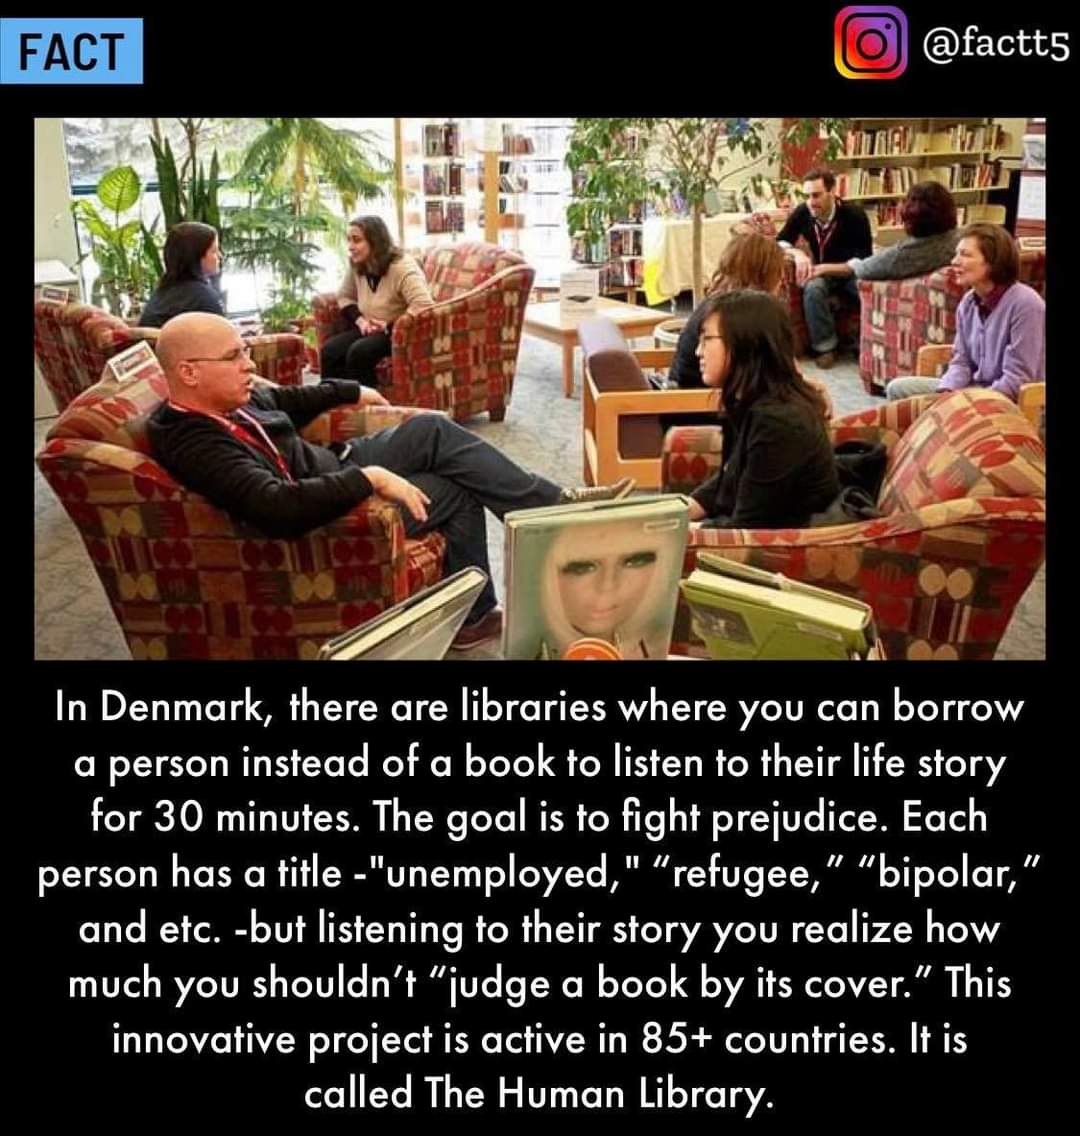 The human library